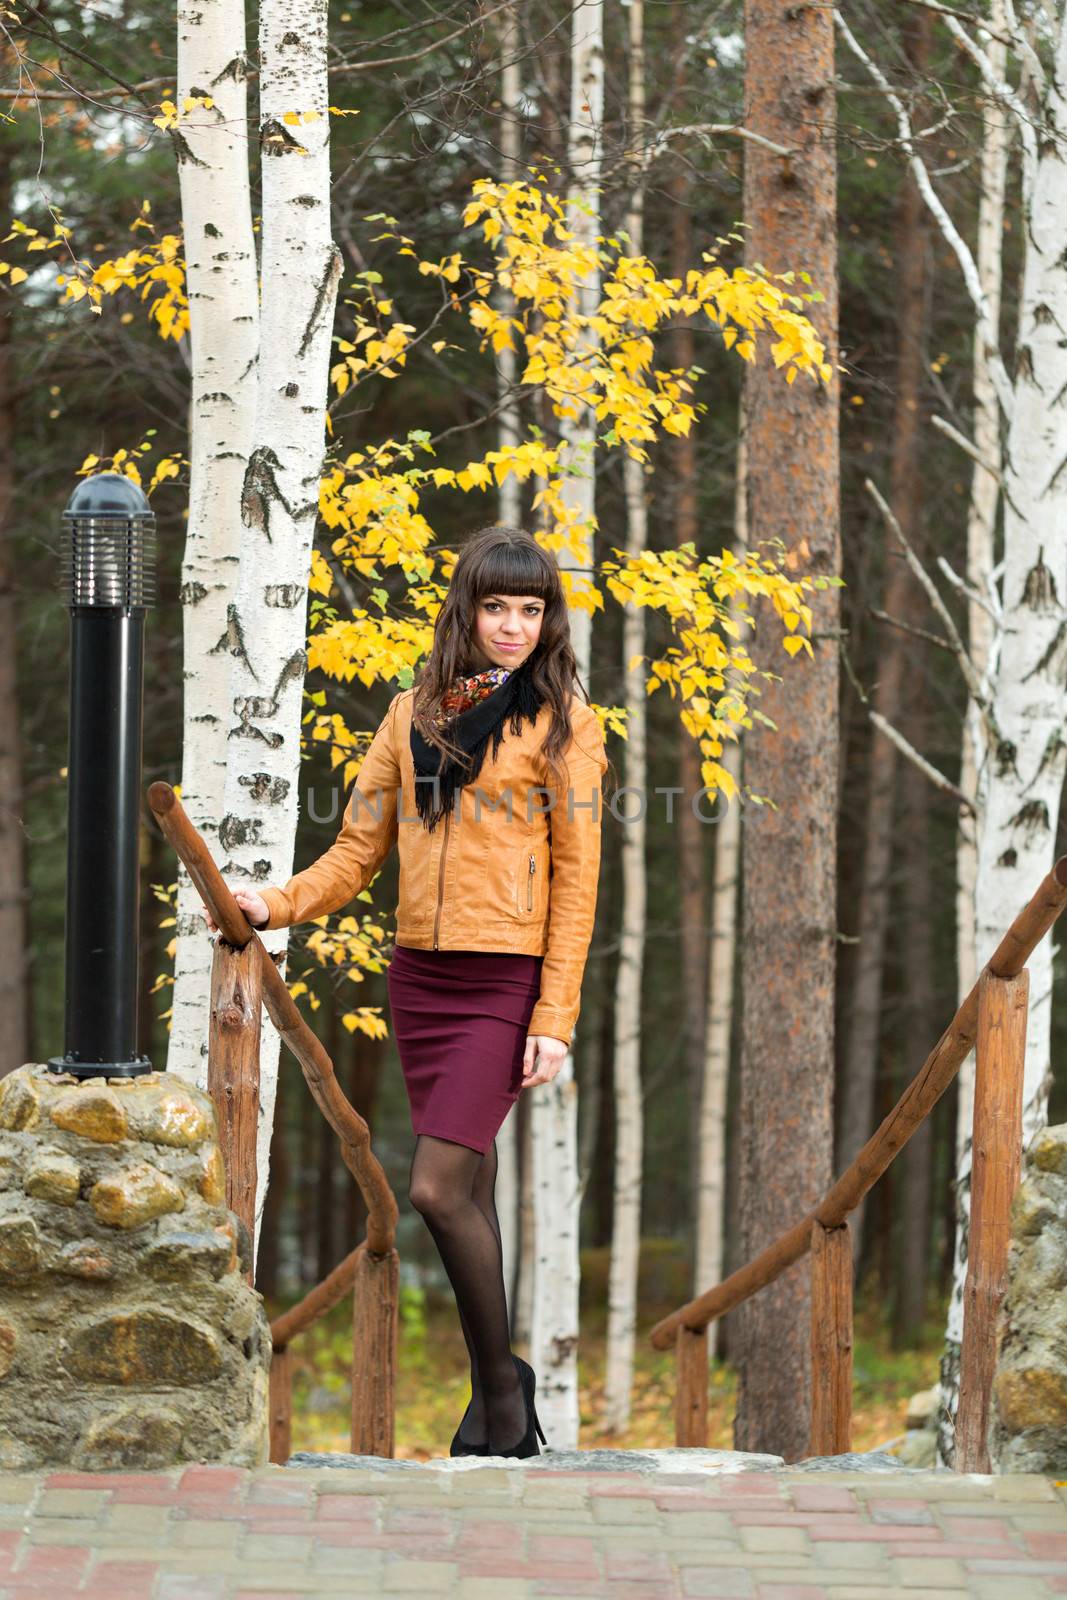 Charming girl in the autumn forest on the stairs